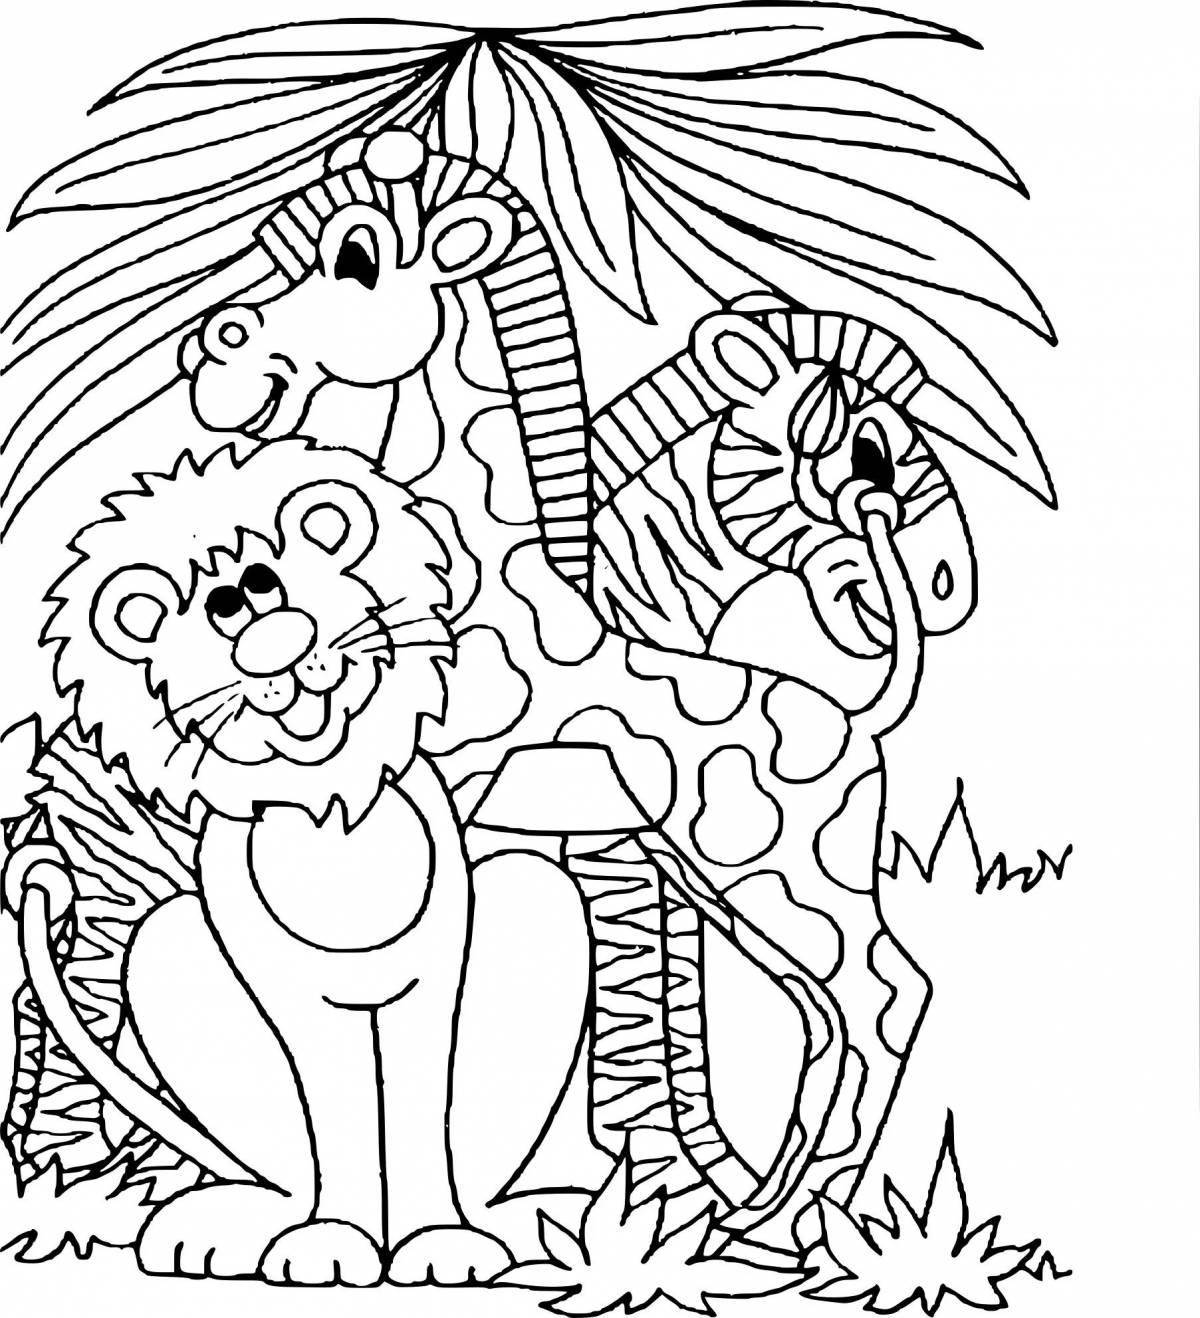 Unique african animals coloring page for kids